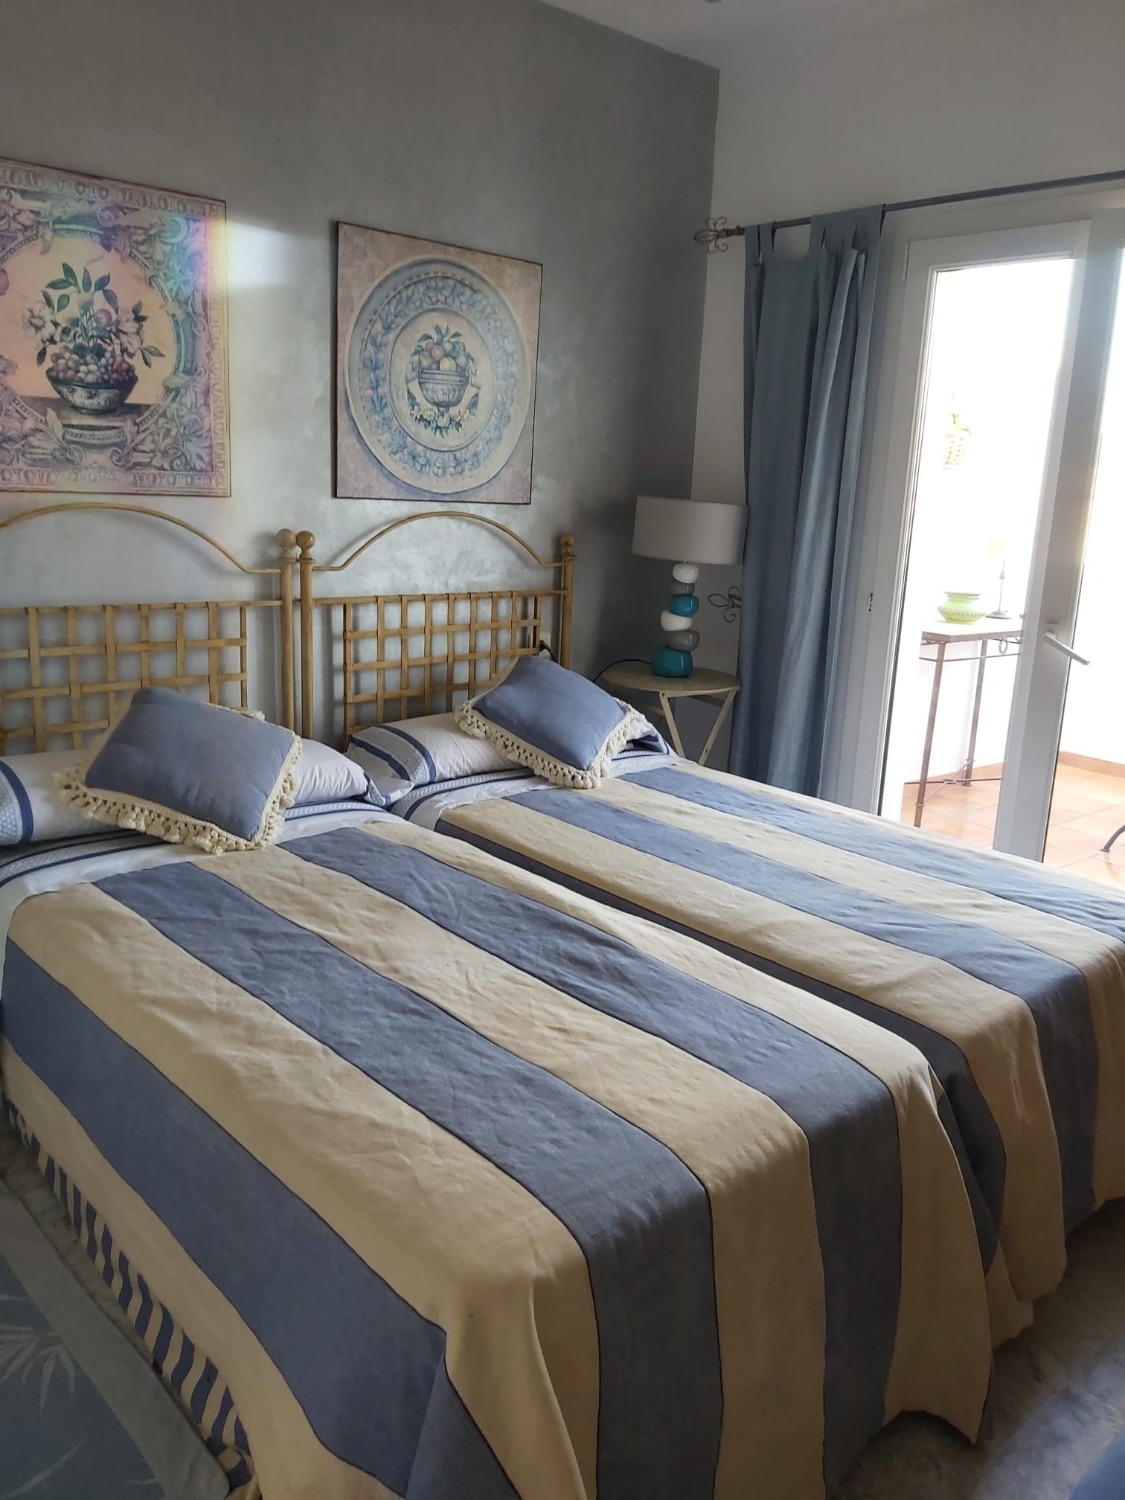 Holidays on the beachfront, Puerto Banus. They are 3 bedrooms and enjoys security 24 hrs.